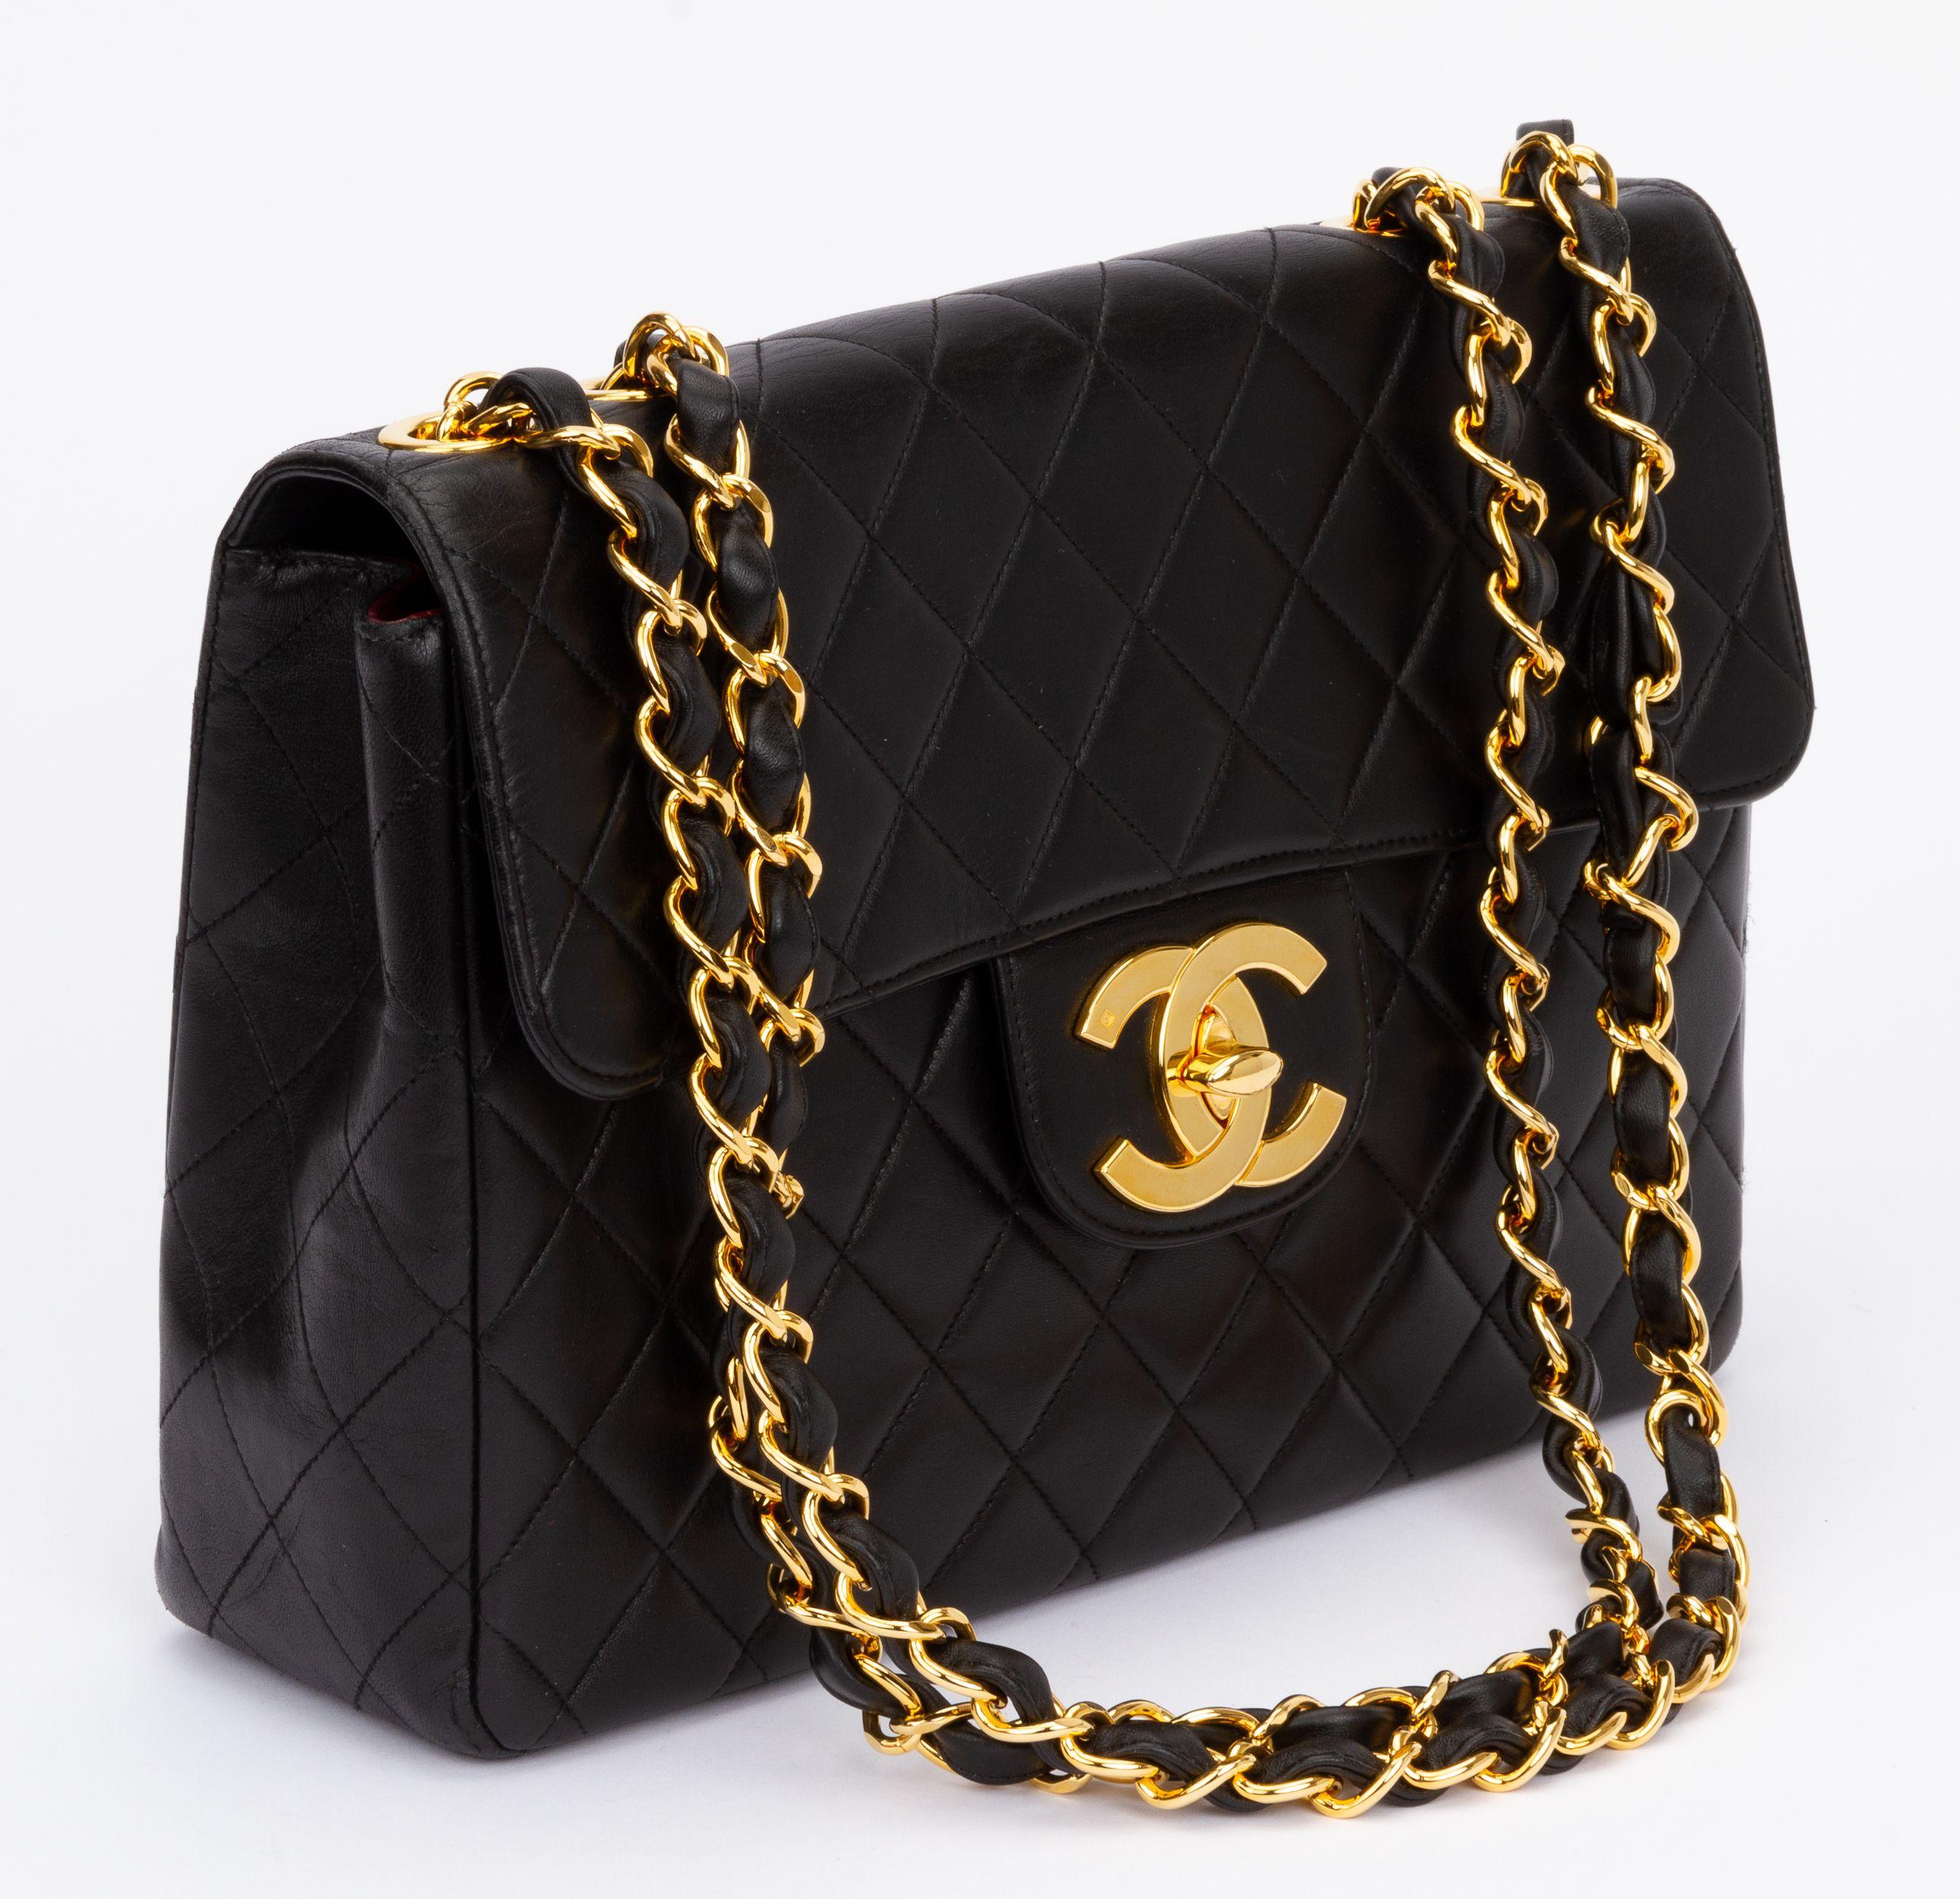 Chanel 90s jumbo black lambskin flap with 24kt gold plated hardware. Excellent condition. Shoulder drop 13